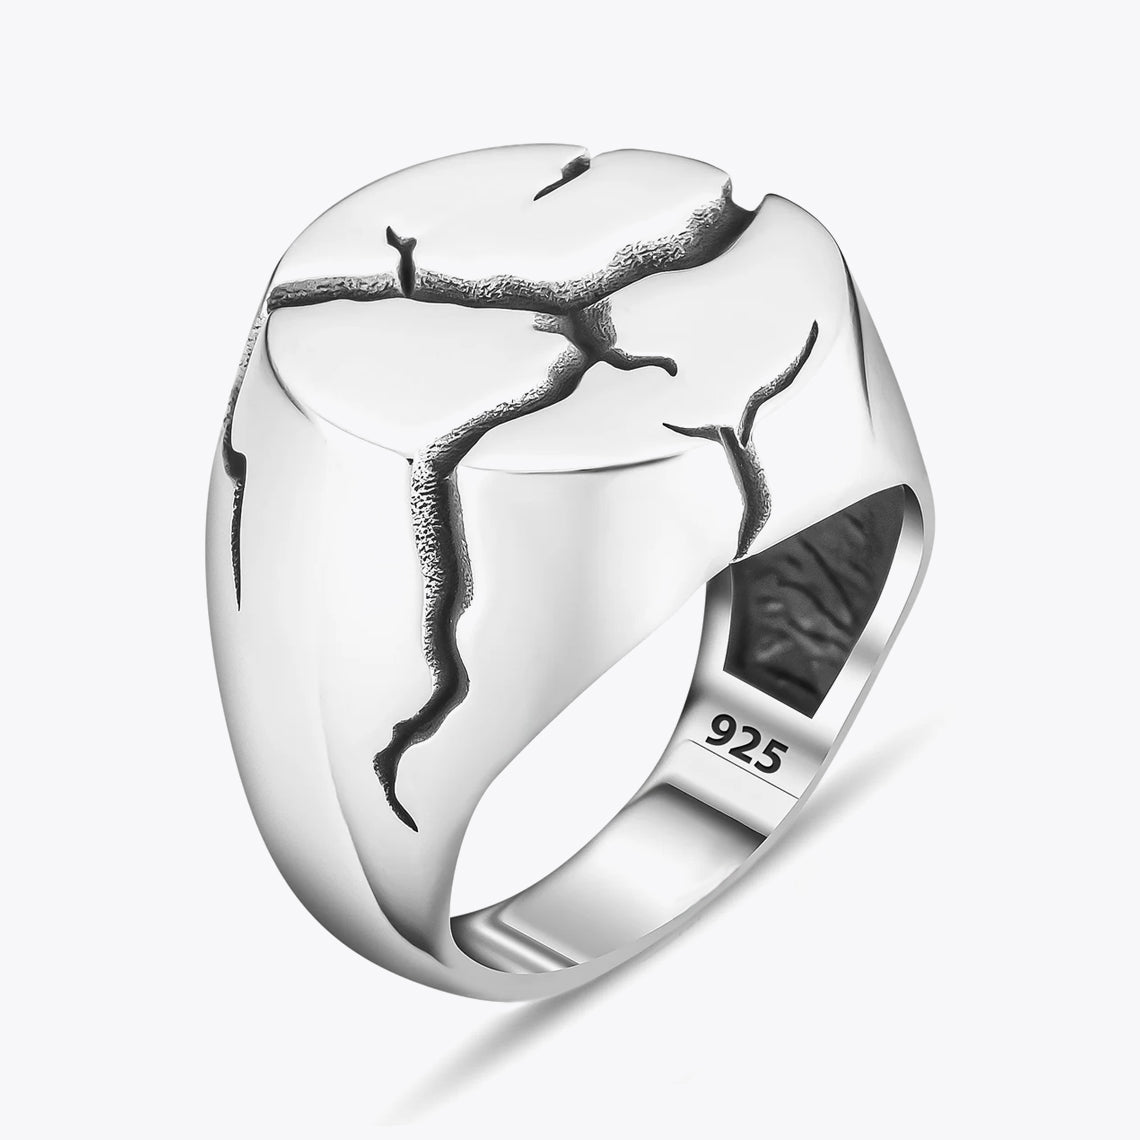 Silver Men's Ring with Cracked Motif - 925 Sterling Silver